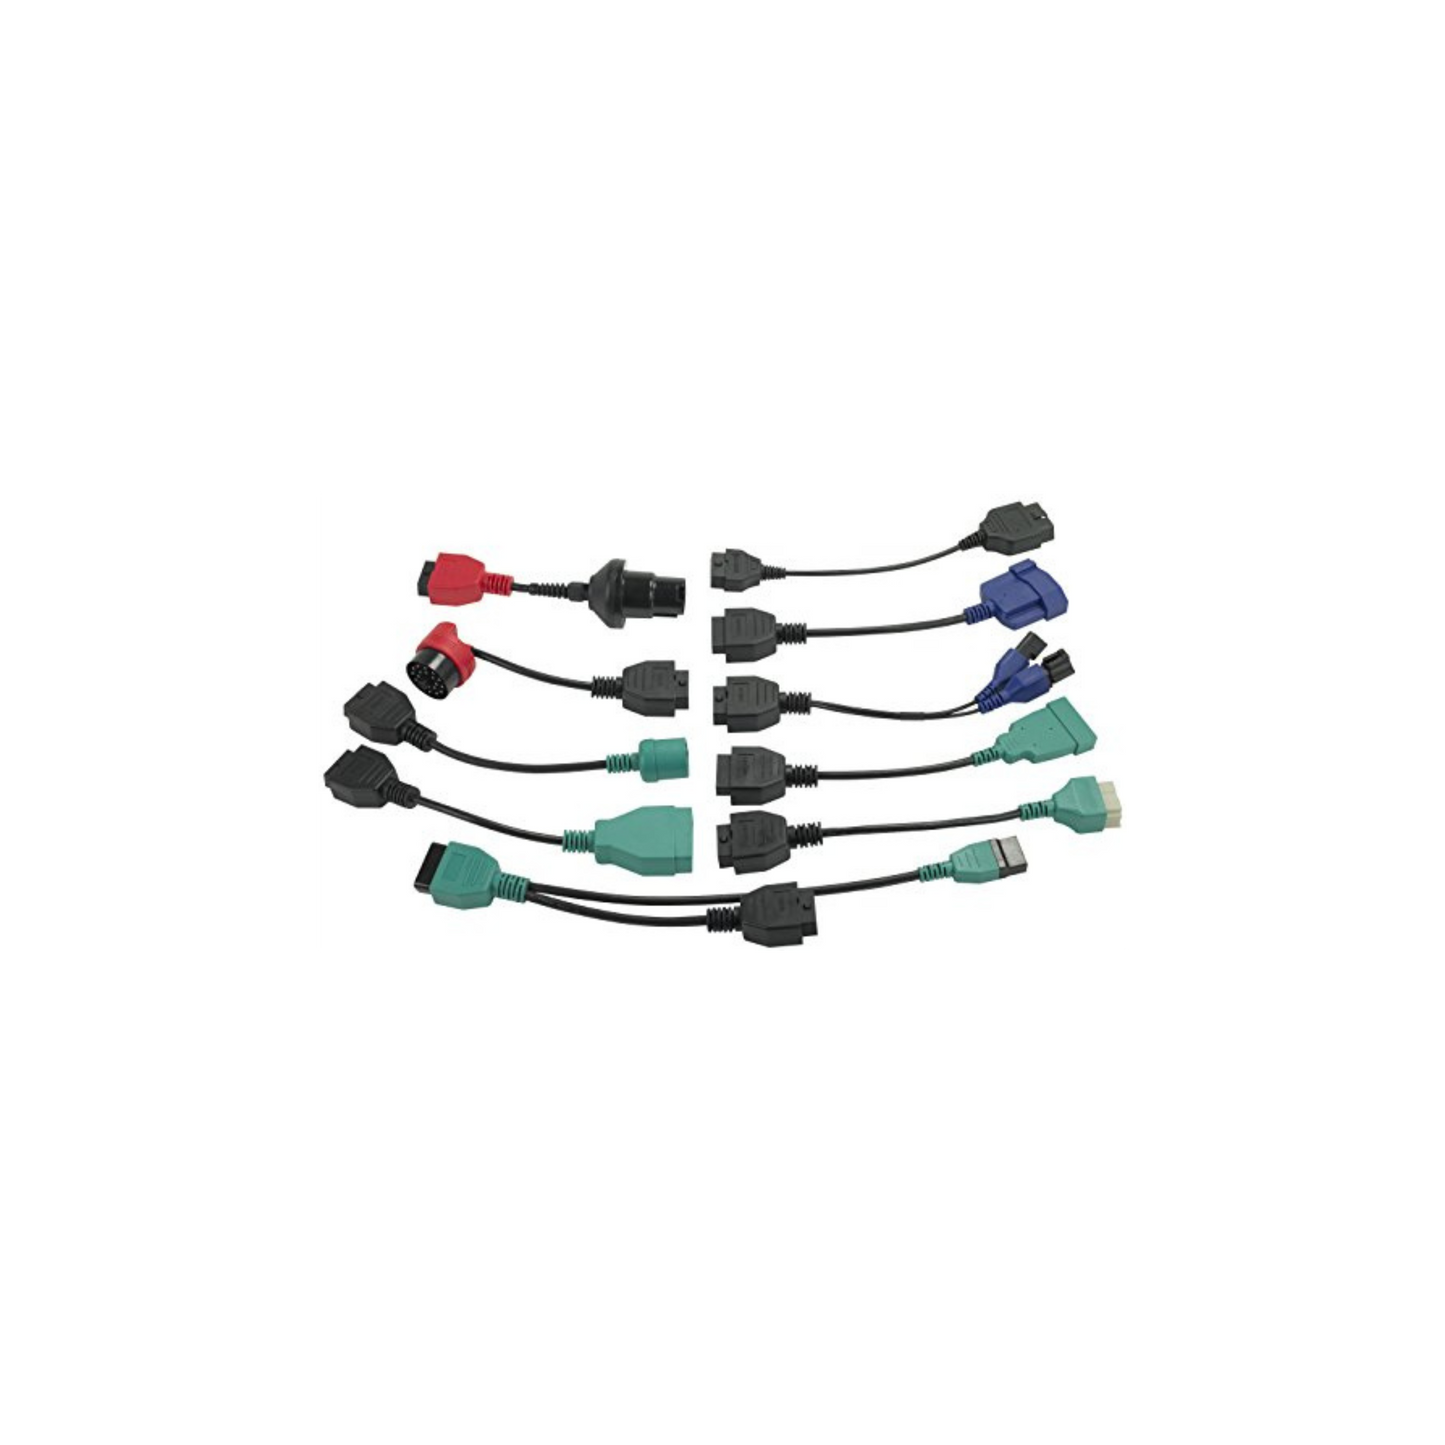 Genisys 3895-100 Genisys Touch 10 Cable Kit